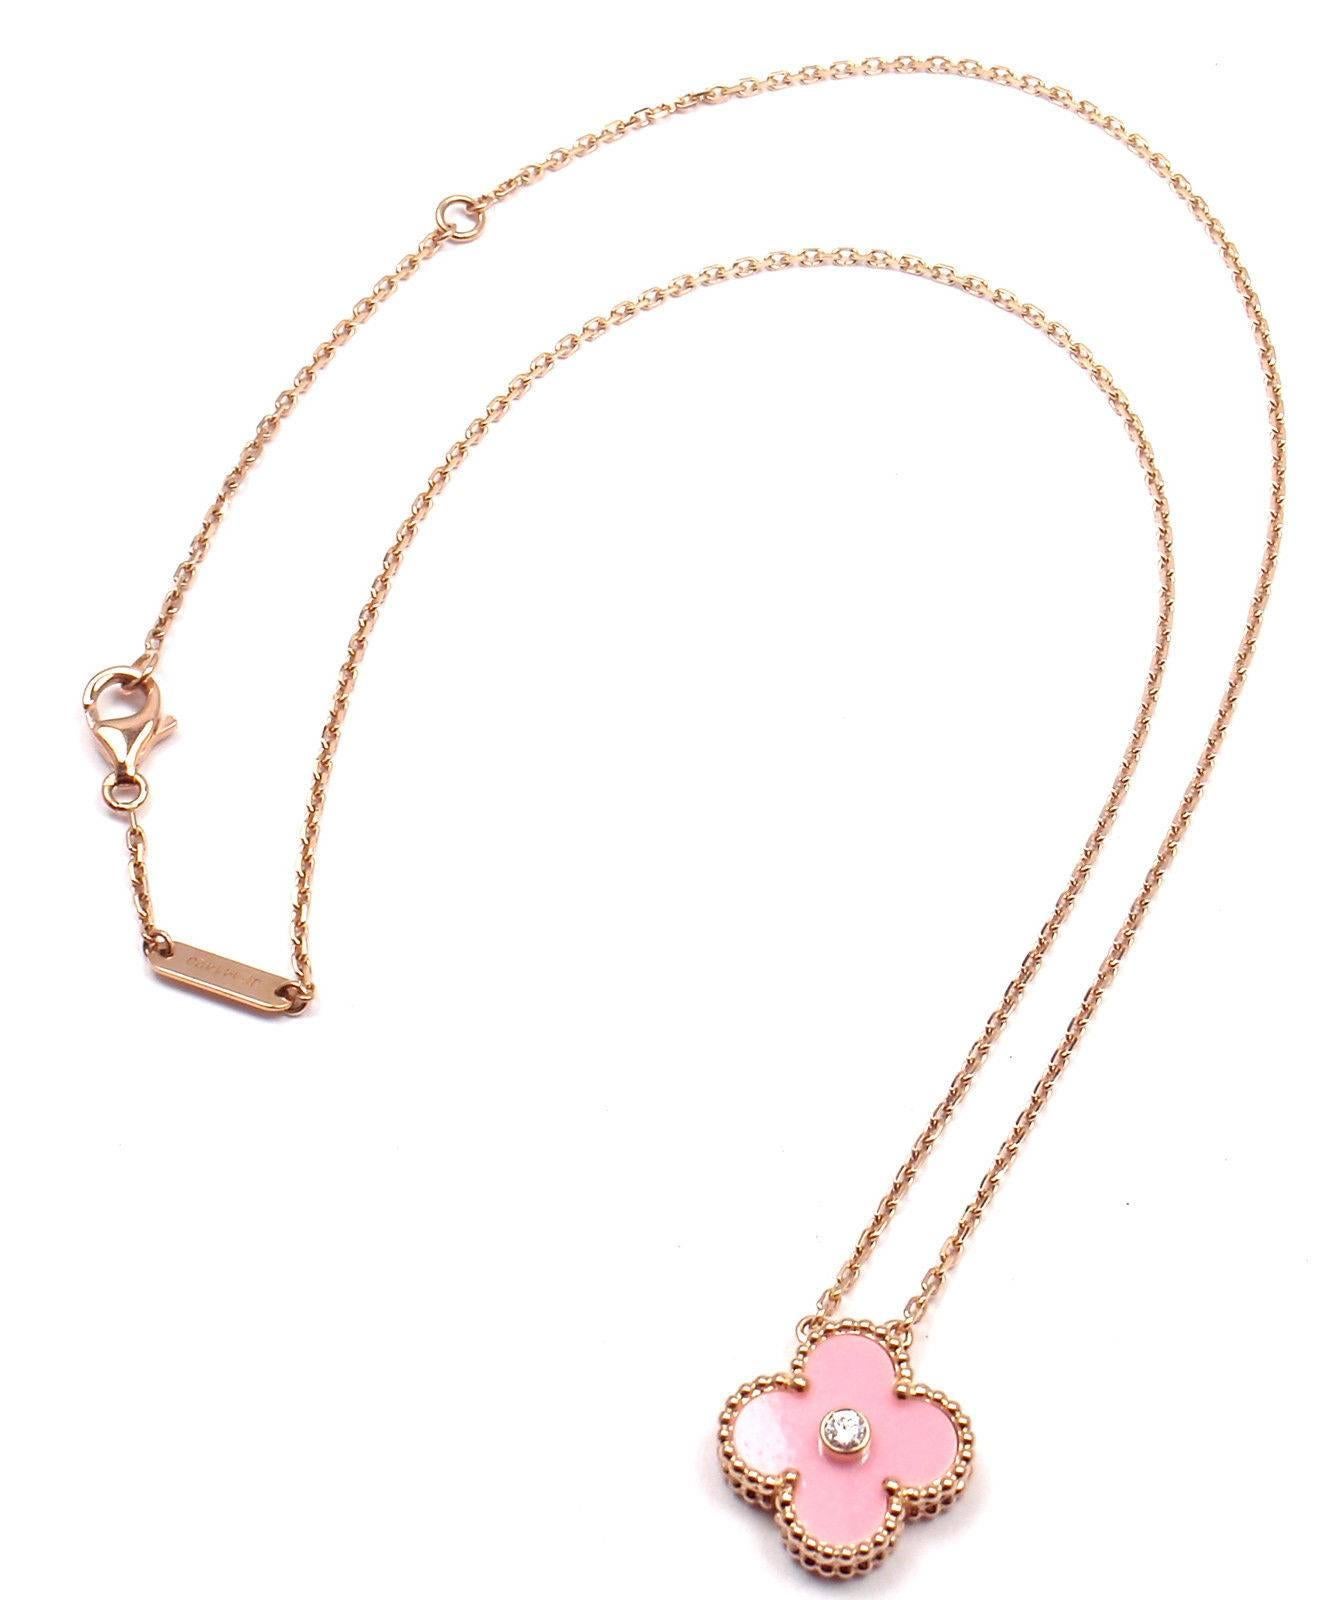 18k Rose Gold Limited Edition Alhambra Diamond And Pink Porcelain Necklace. 
With 1 alhambra shape pink porcelain clover 15mm
1 round brilliant cut diamond VVS1 clarity, E color total weigh approx. .06ct
This necklace is LIMITED EDITION Van Cleef